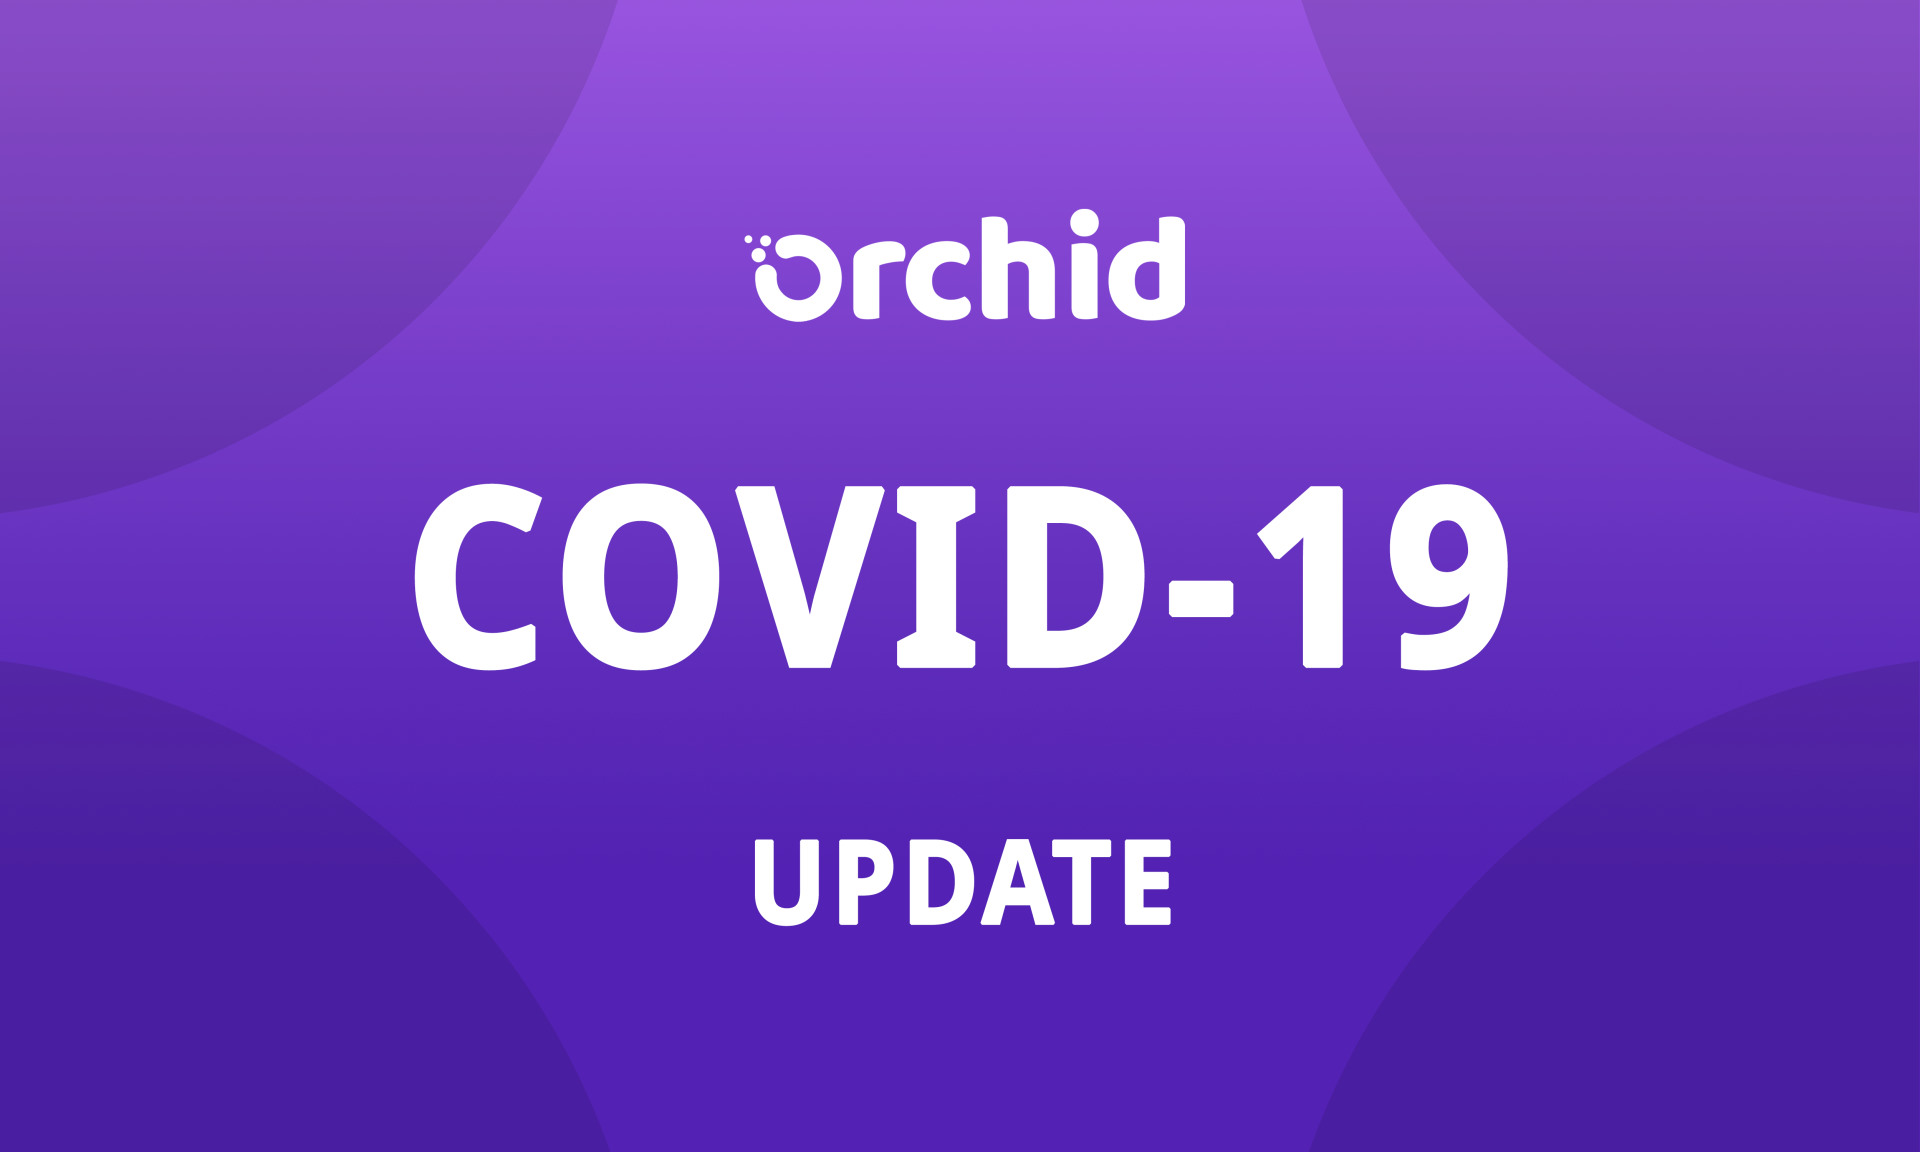 Orchid update: actions taken in response to COVID-19